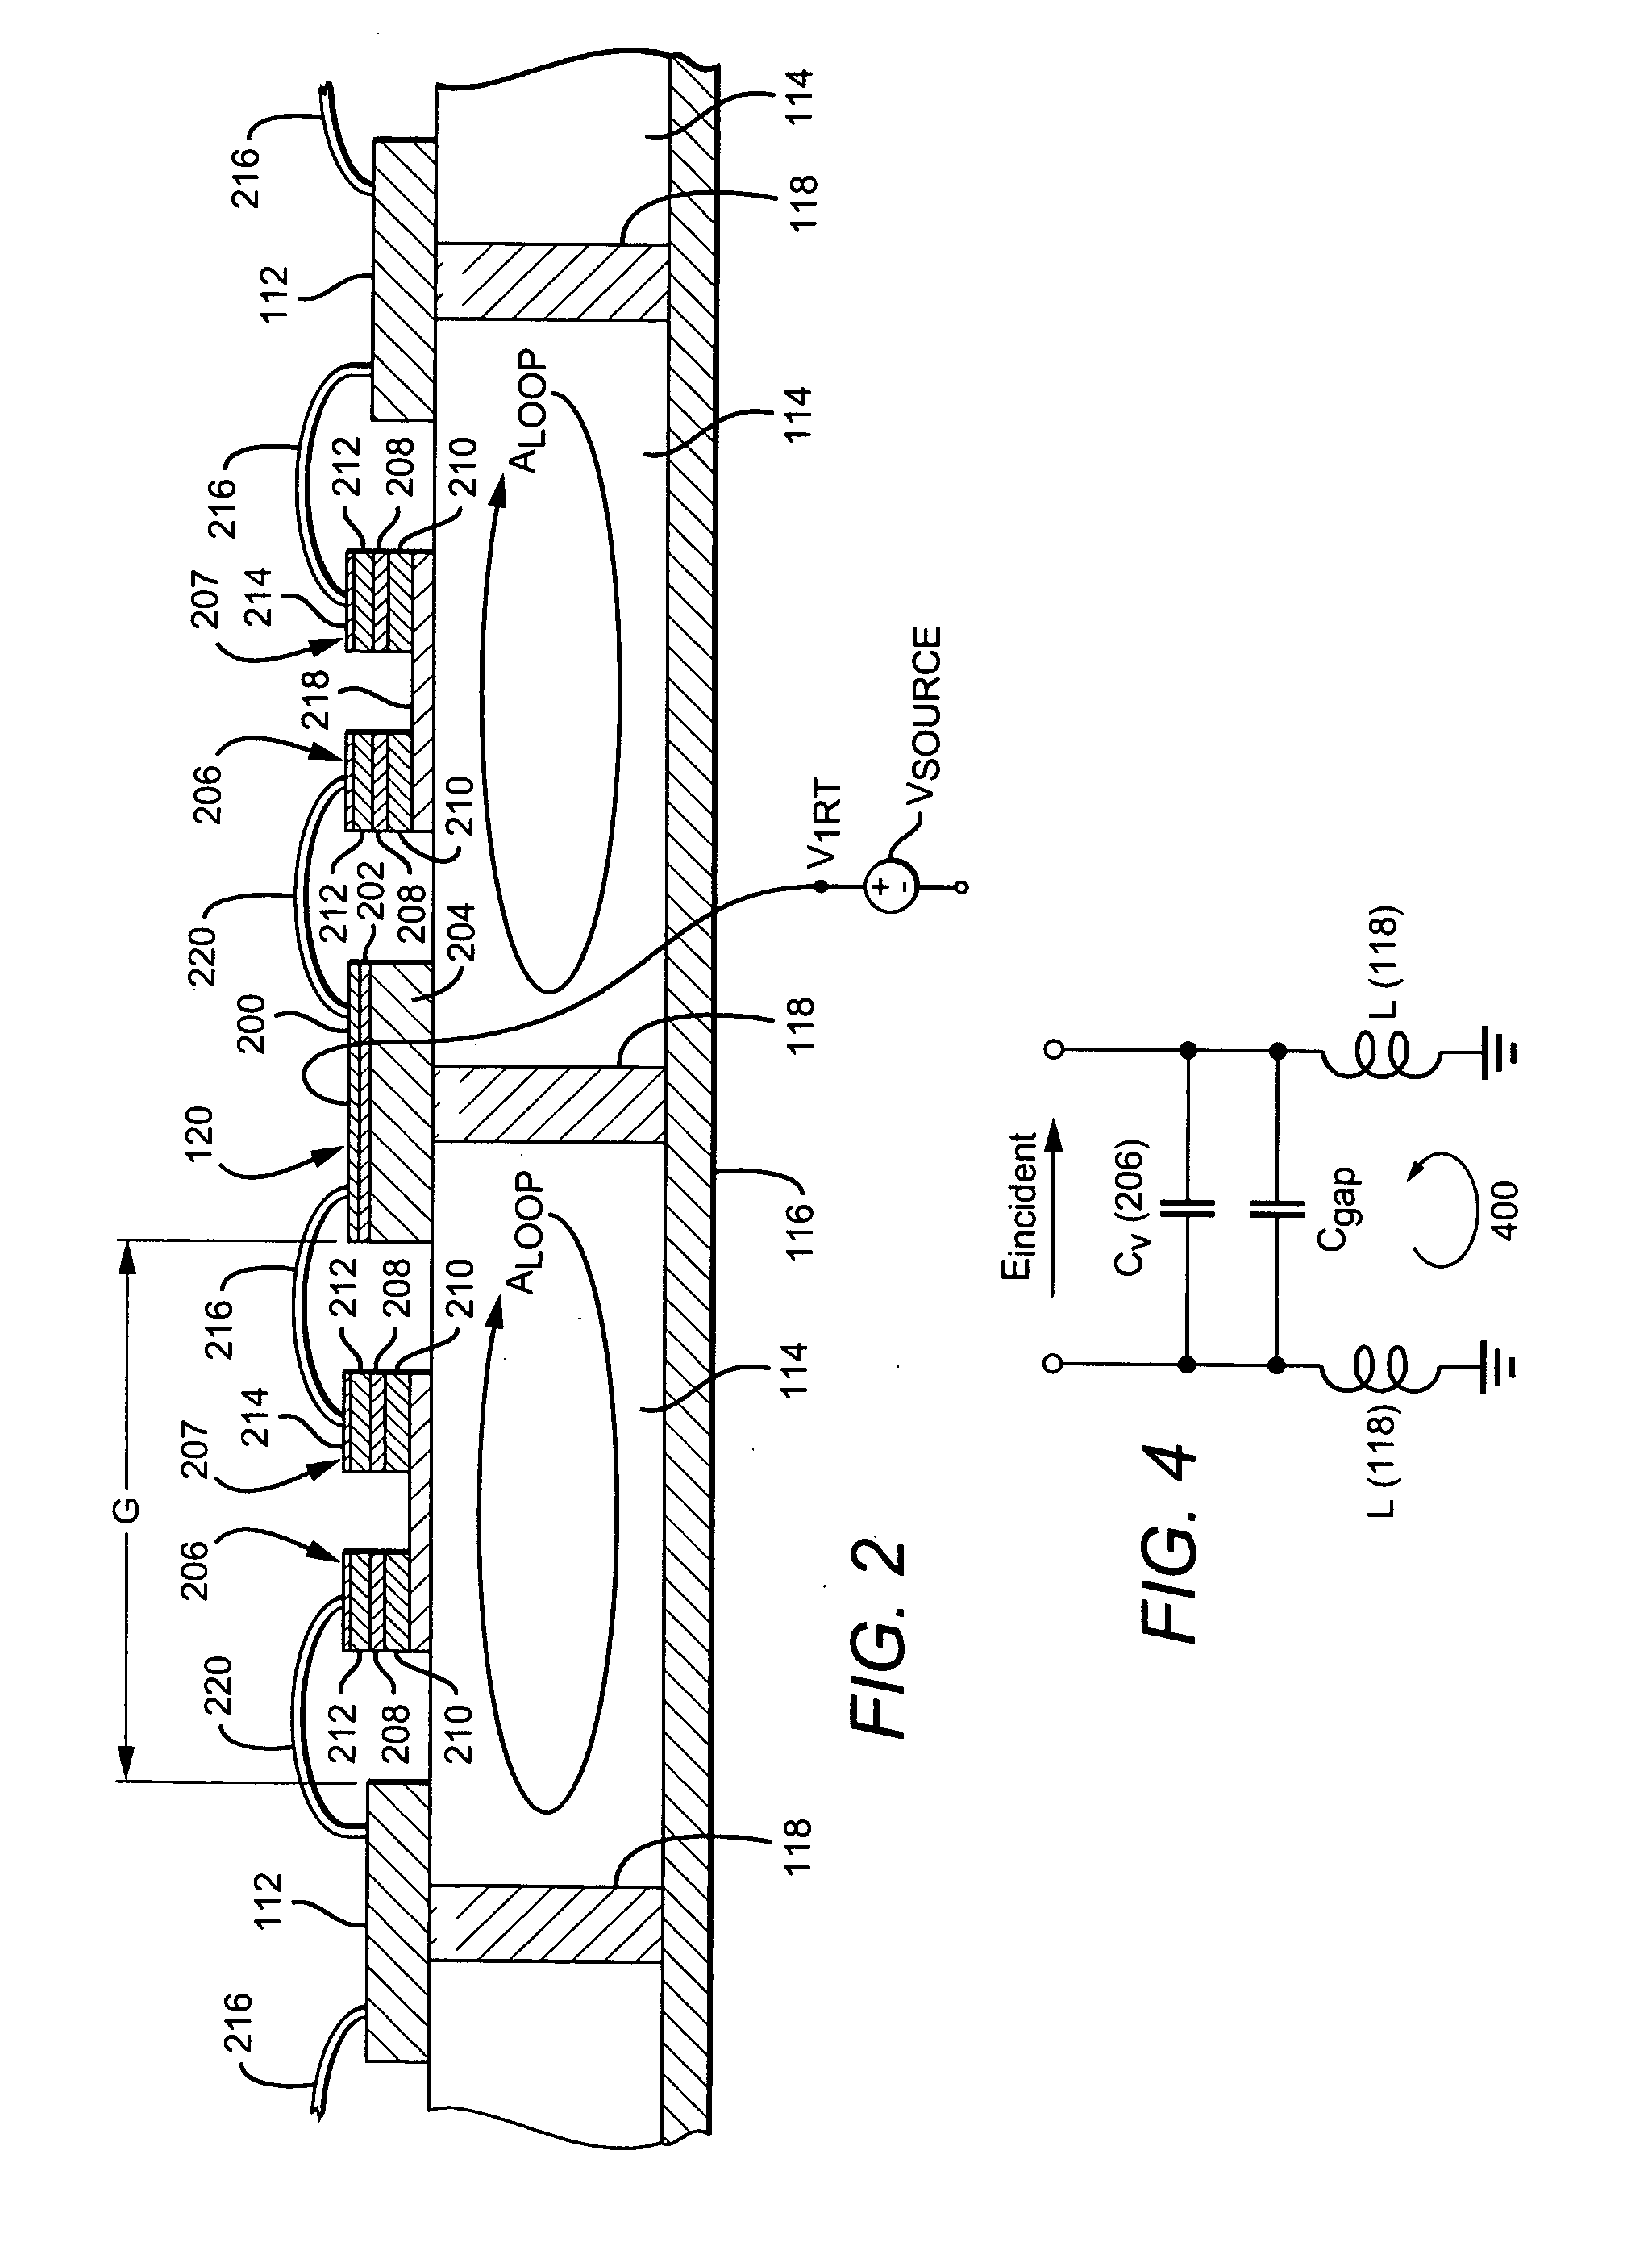 Method and apparatus for changing the polarization of a signal